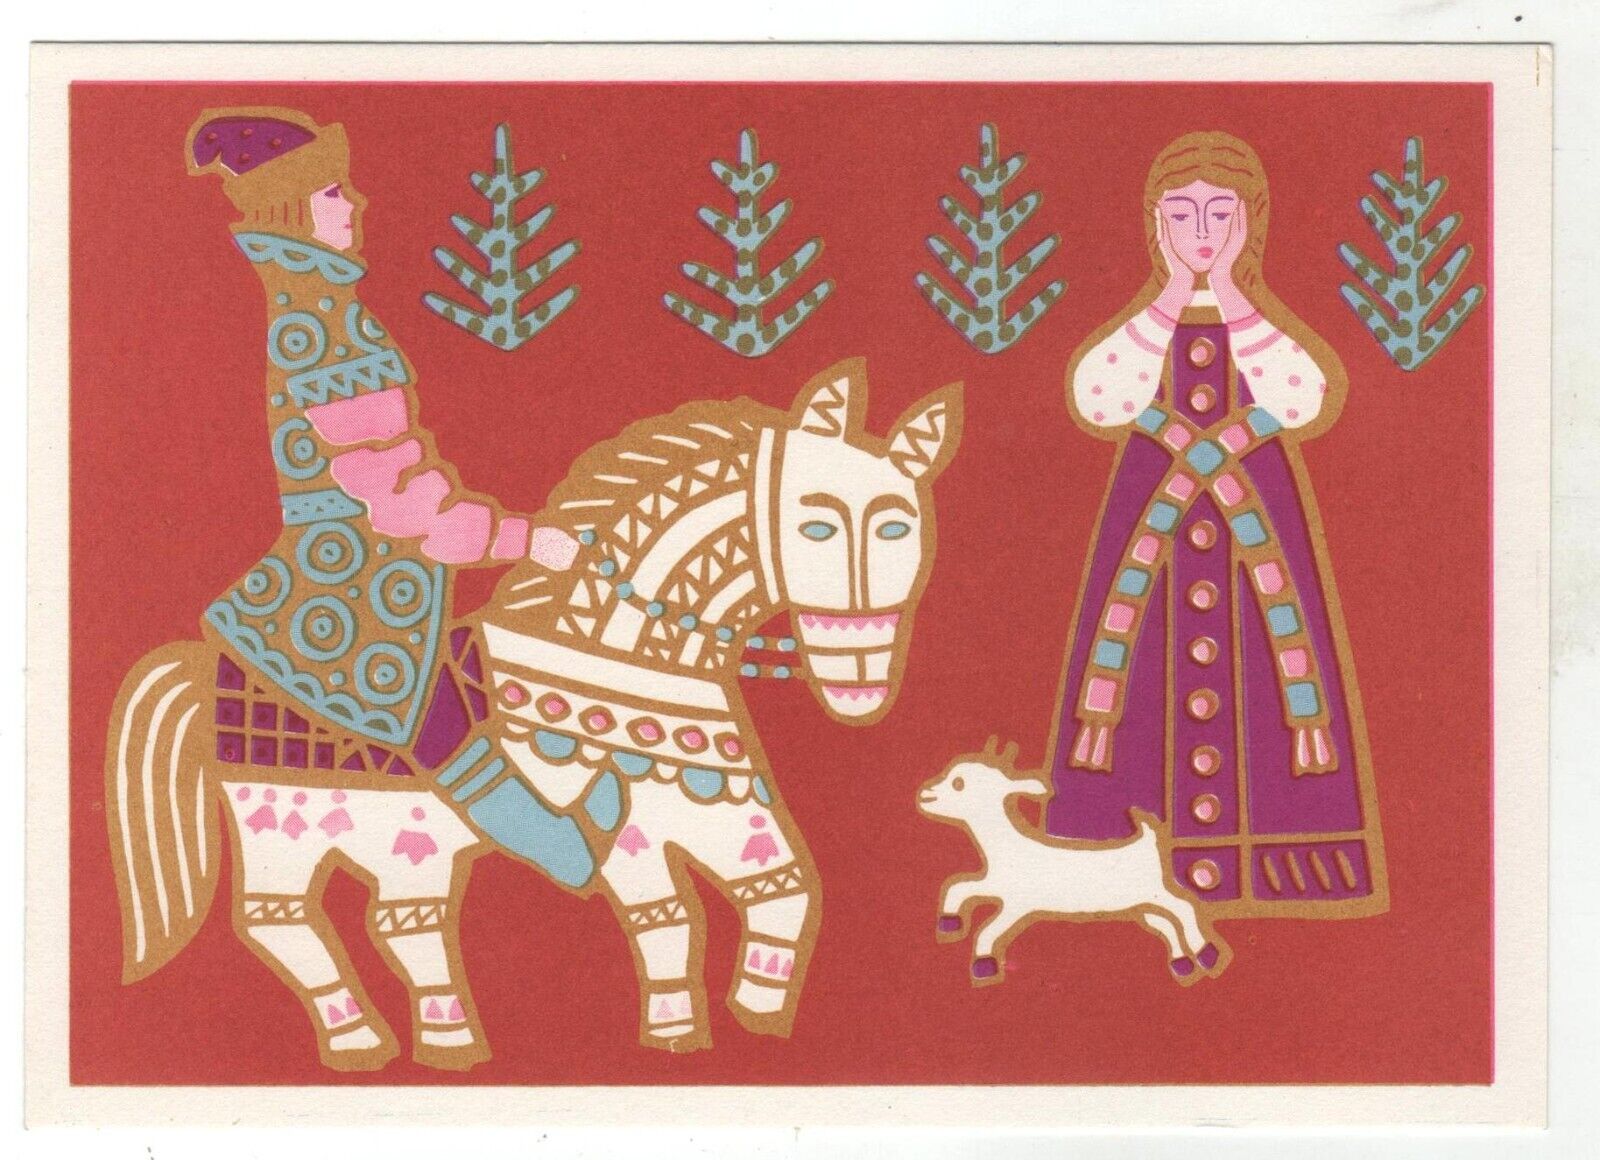 1967 FAIRY TALE Decorative drawing Sister & brother FOLK ART RUSSIA POSTCARD Old